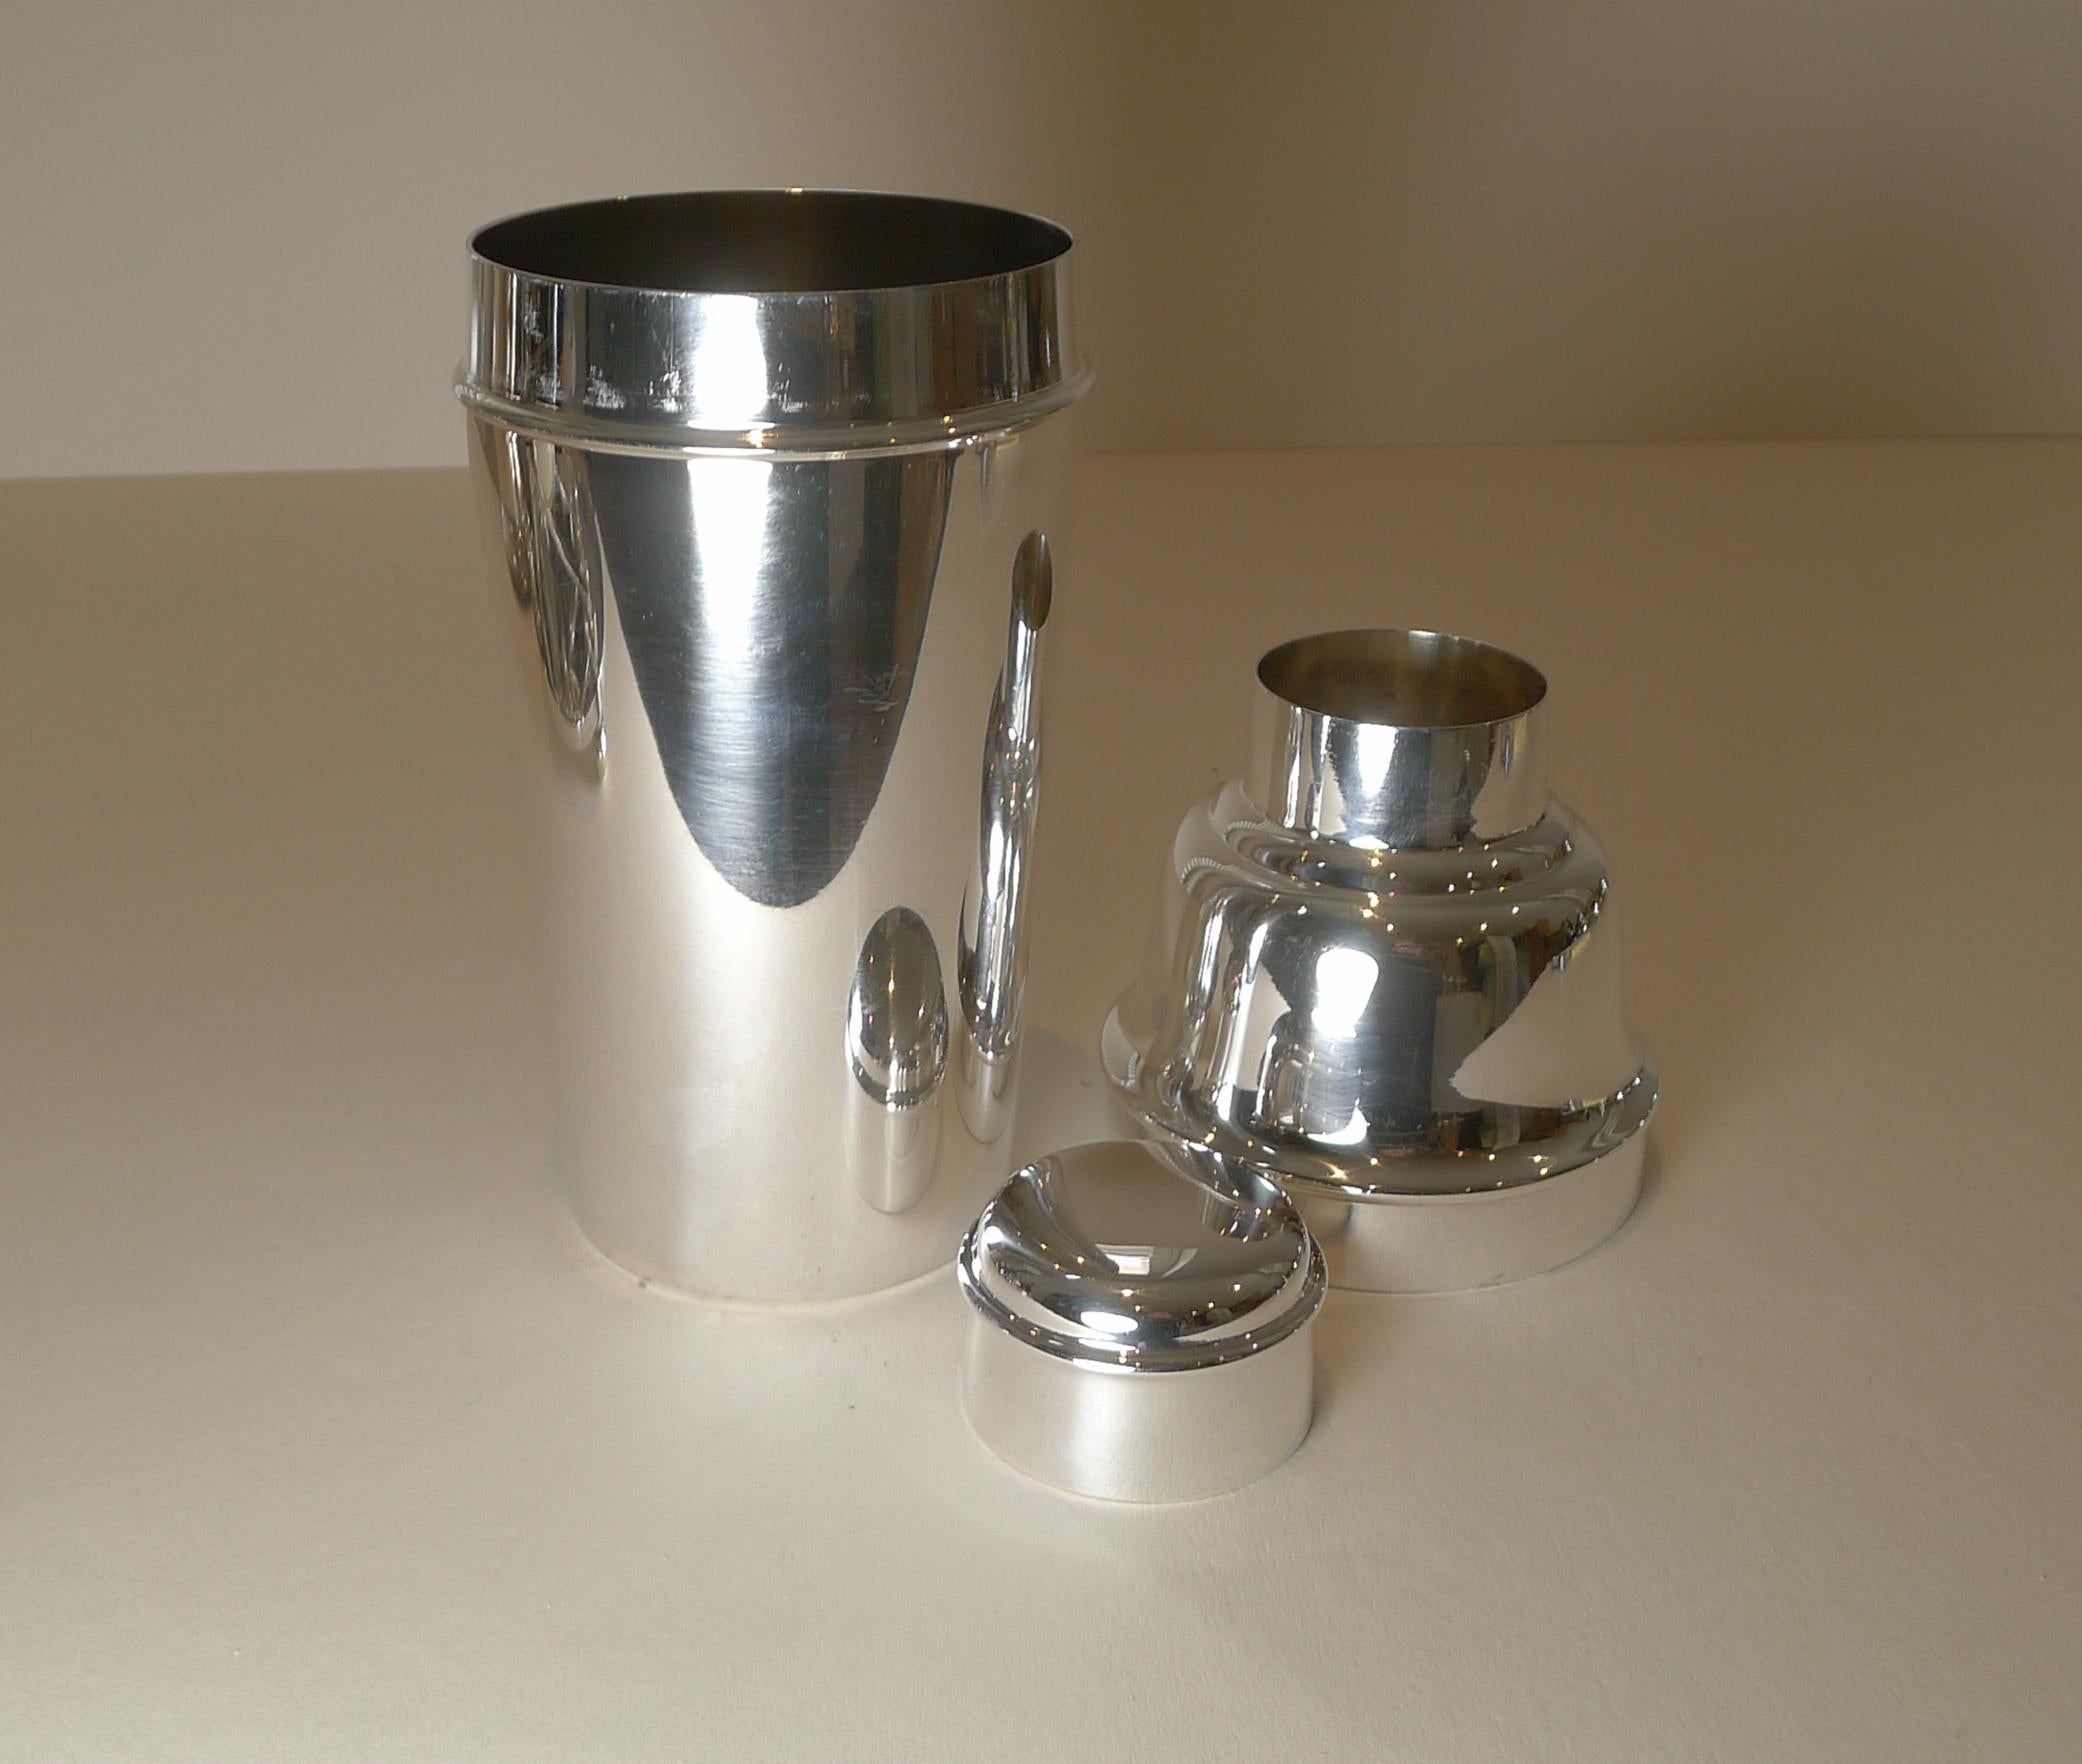 English Art Deco Silver Plated Cocktail Shaker by Mappin & Webb For Sale 5